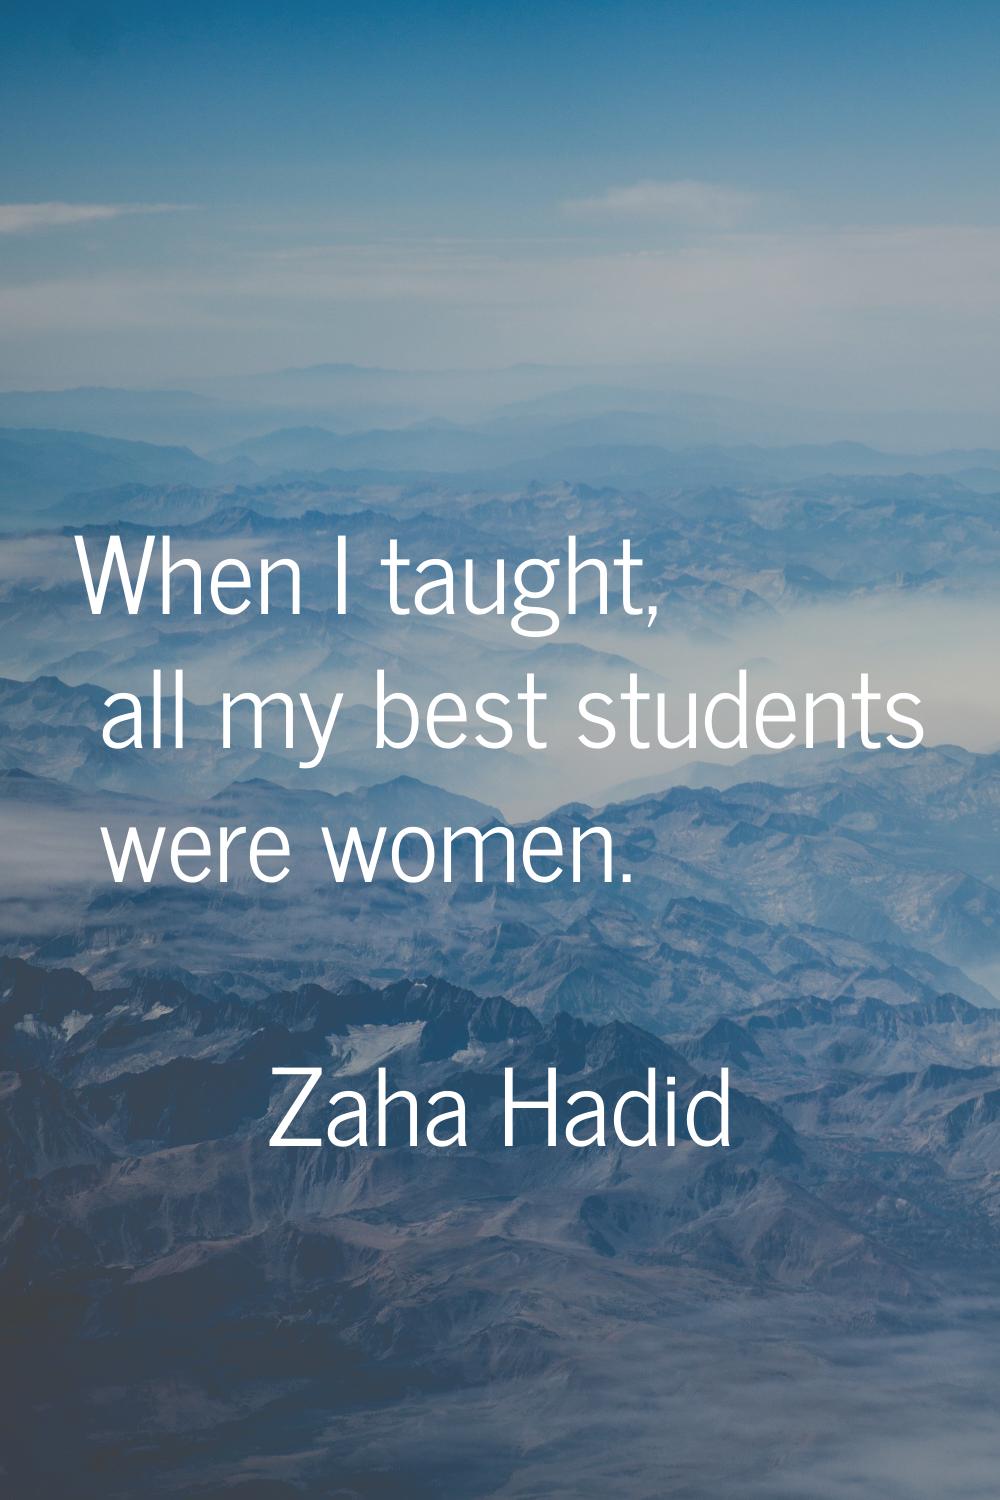 When I taught, all my best students were women.